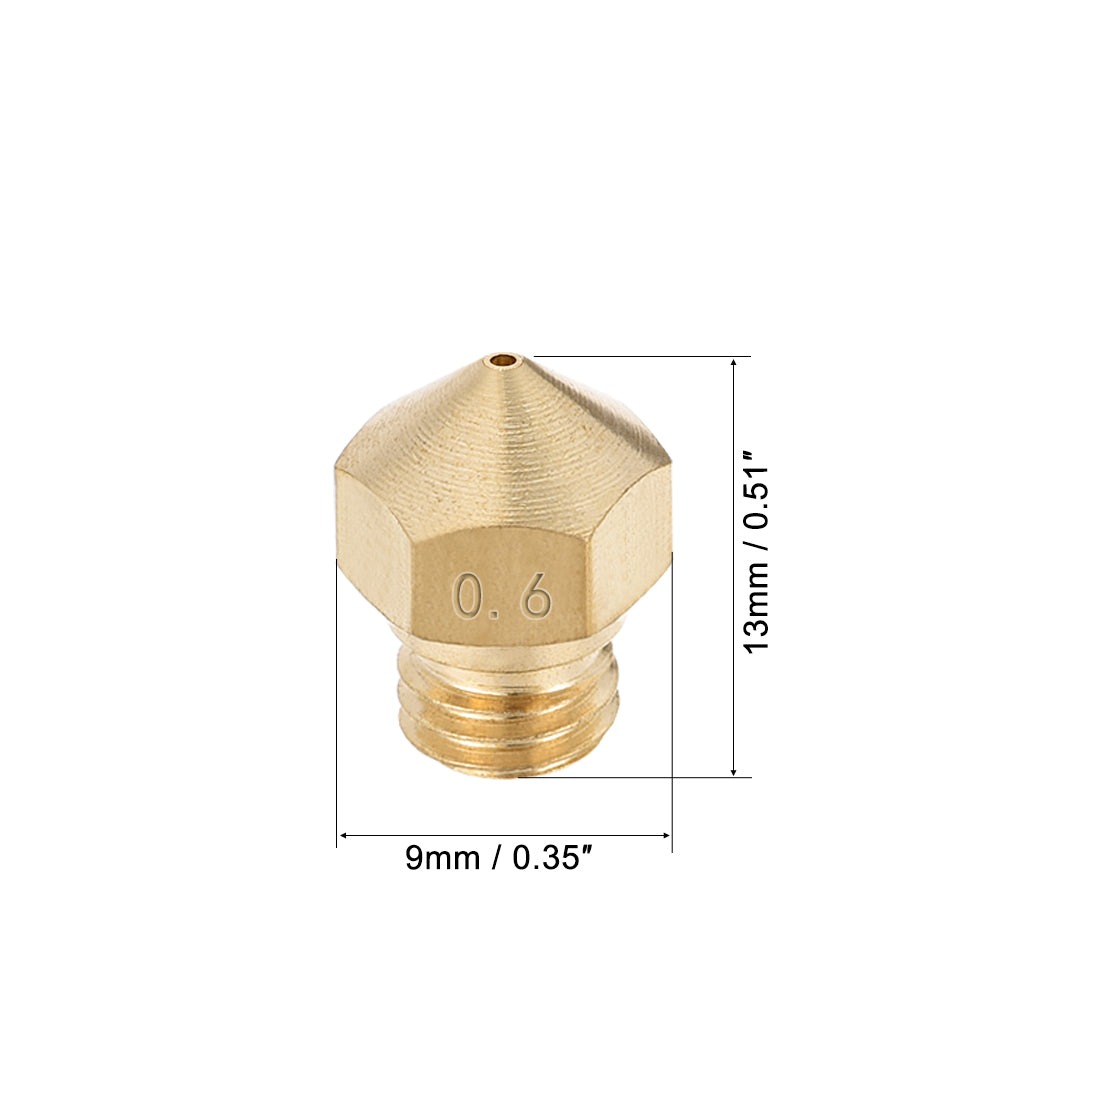 Uxcell Uxcell 1mm 3D Printer Nozzle, Fit for MK10, for 1.75mm Filament Brass 2pcs